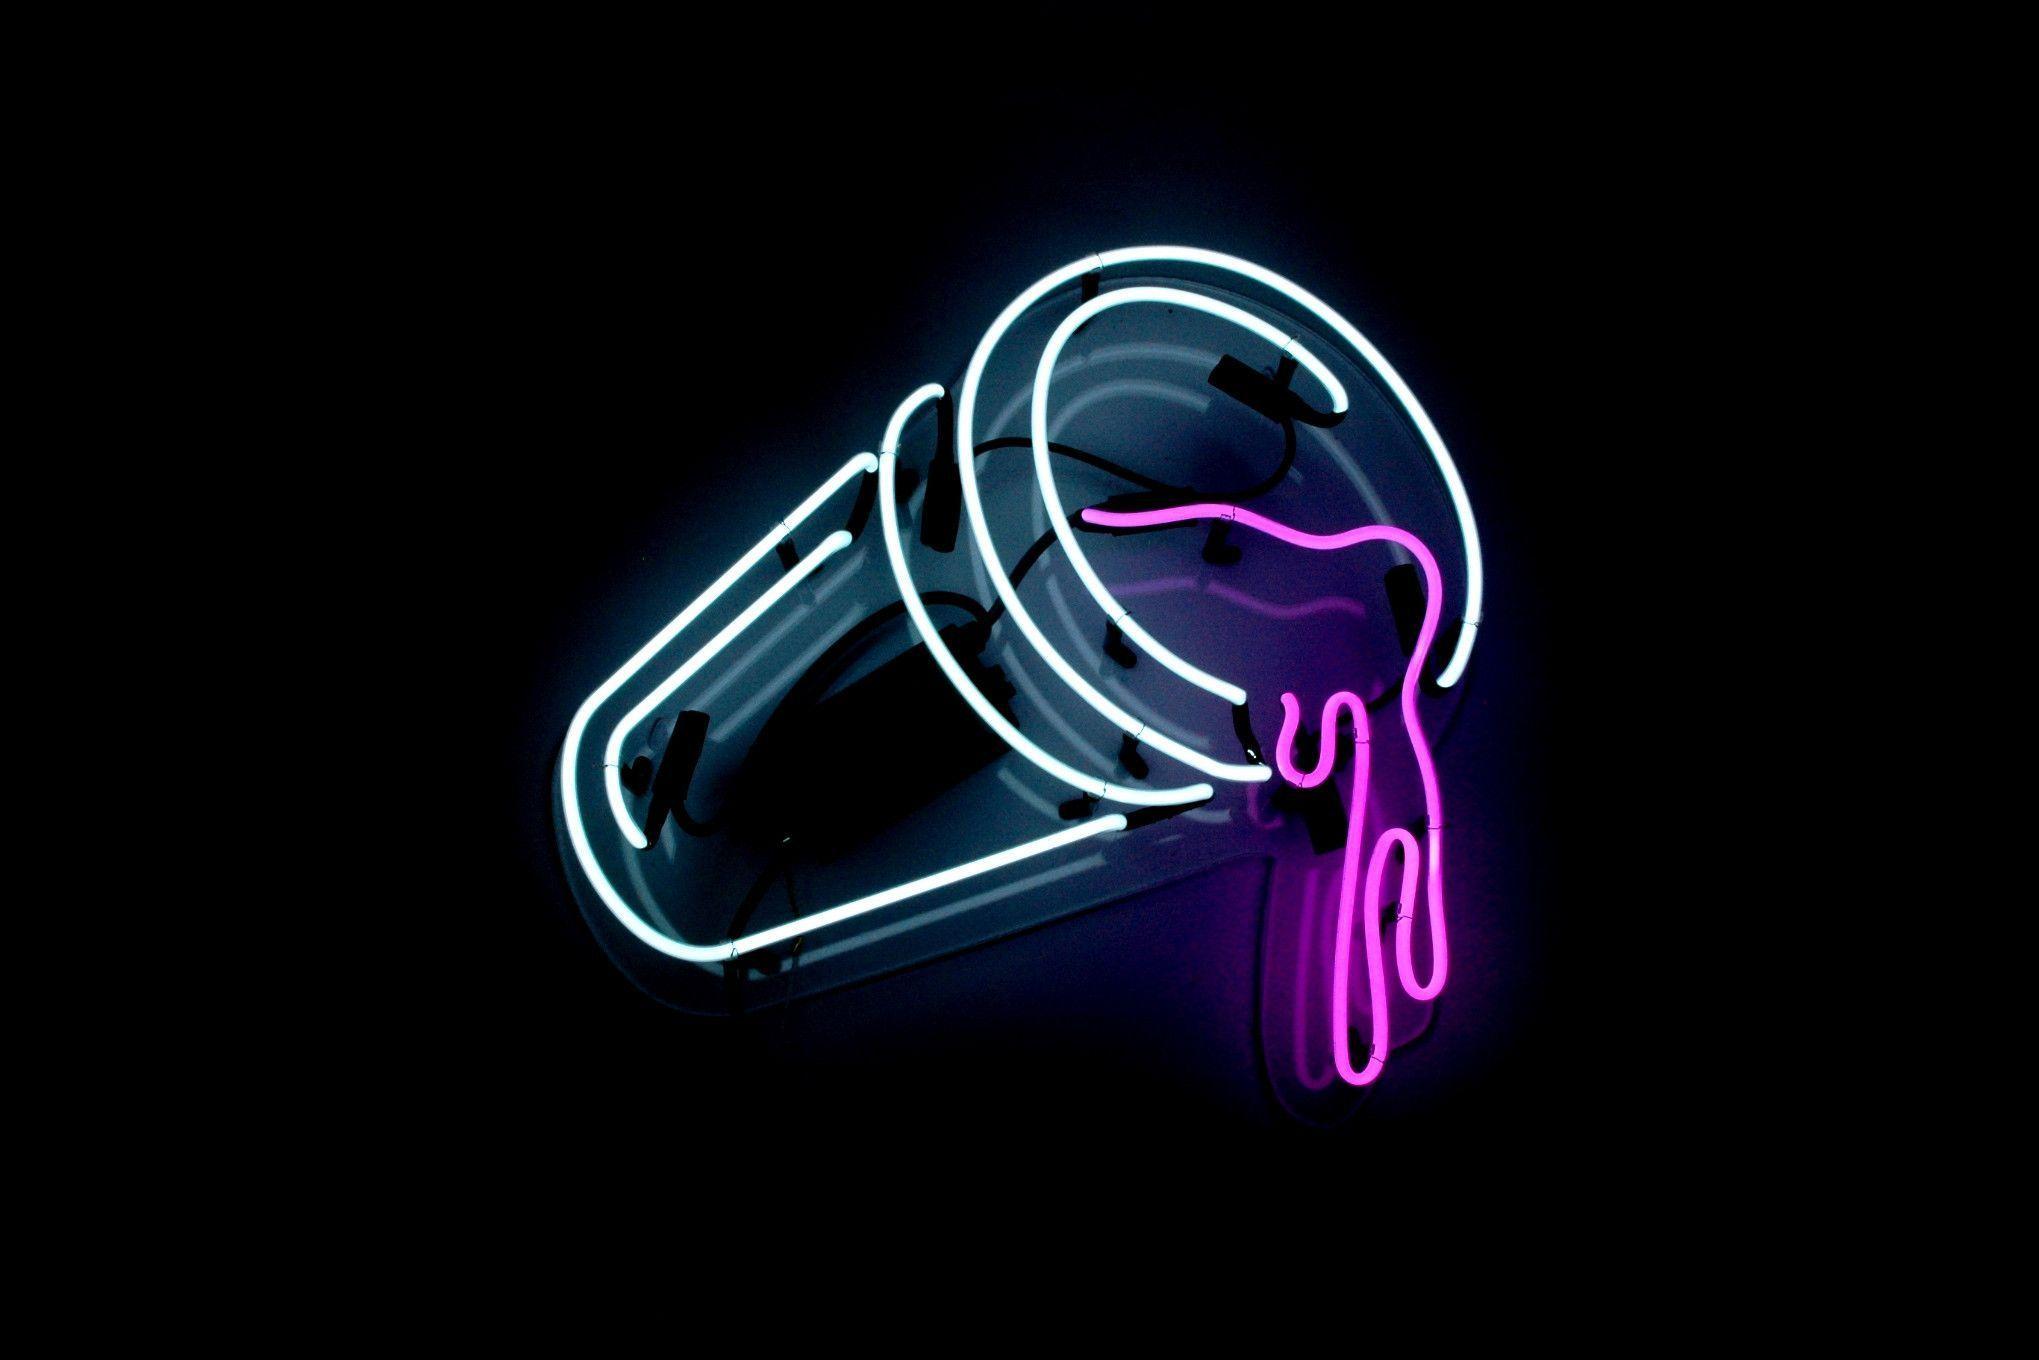 Aesthetic Grunge Neon Signs Wallpapers - Top Free Aesthetic Grunge Neon